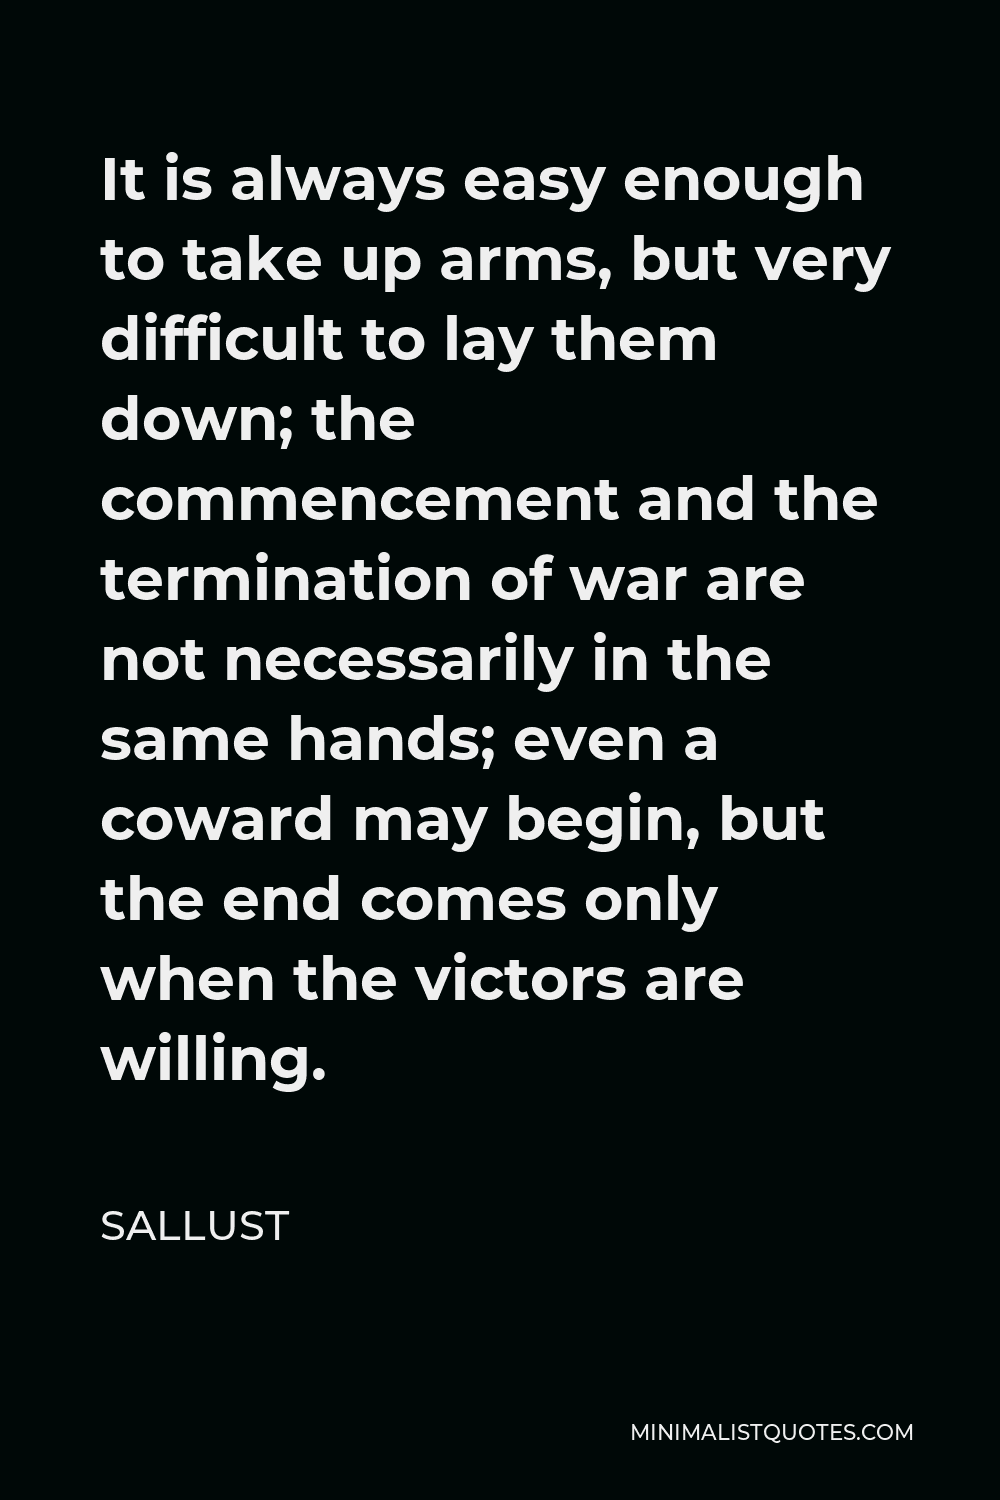 Sallust Quote - It is always easy enough to take up arms, but very difficult to lay them down; the commencement and the termination of war are not necessarily in the same hands; even a coward may begin, but the end comes only when the victors are willing.